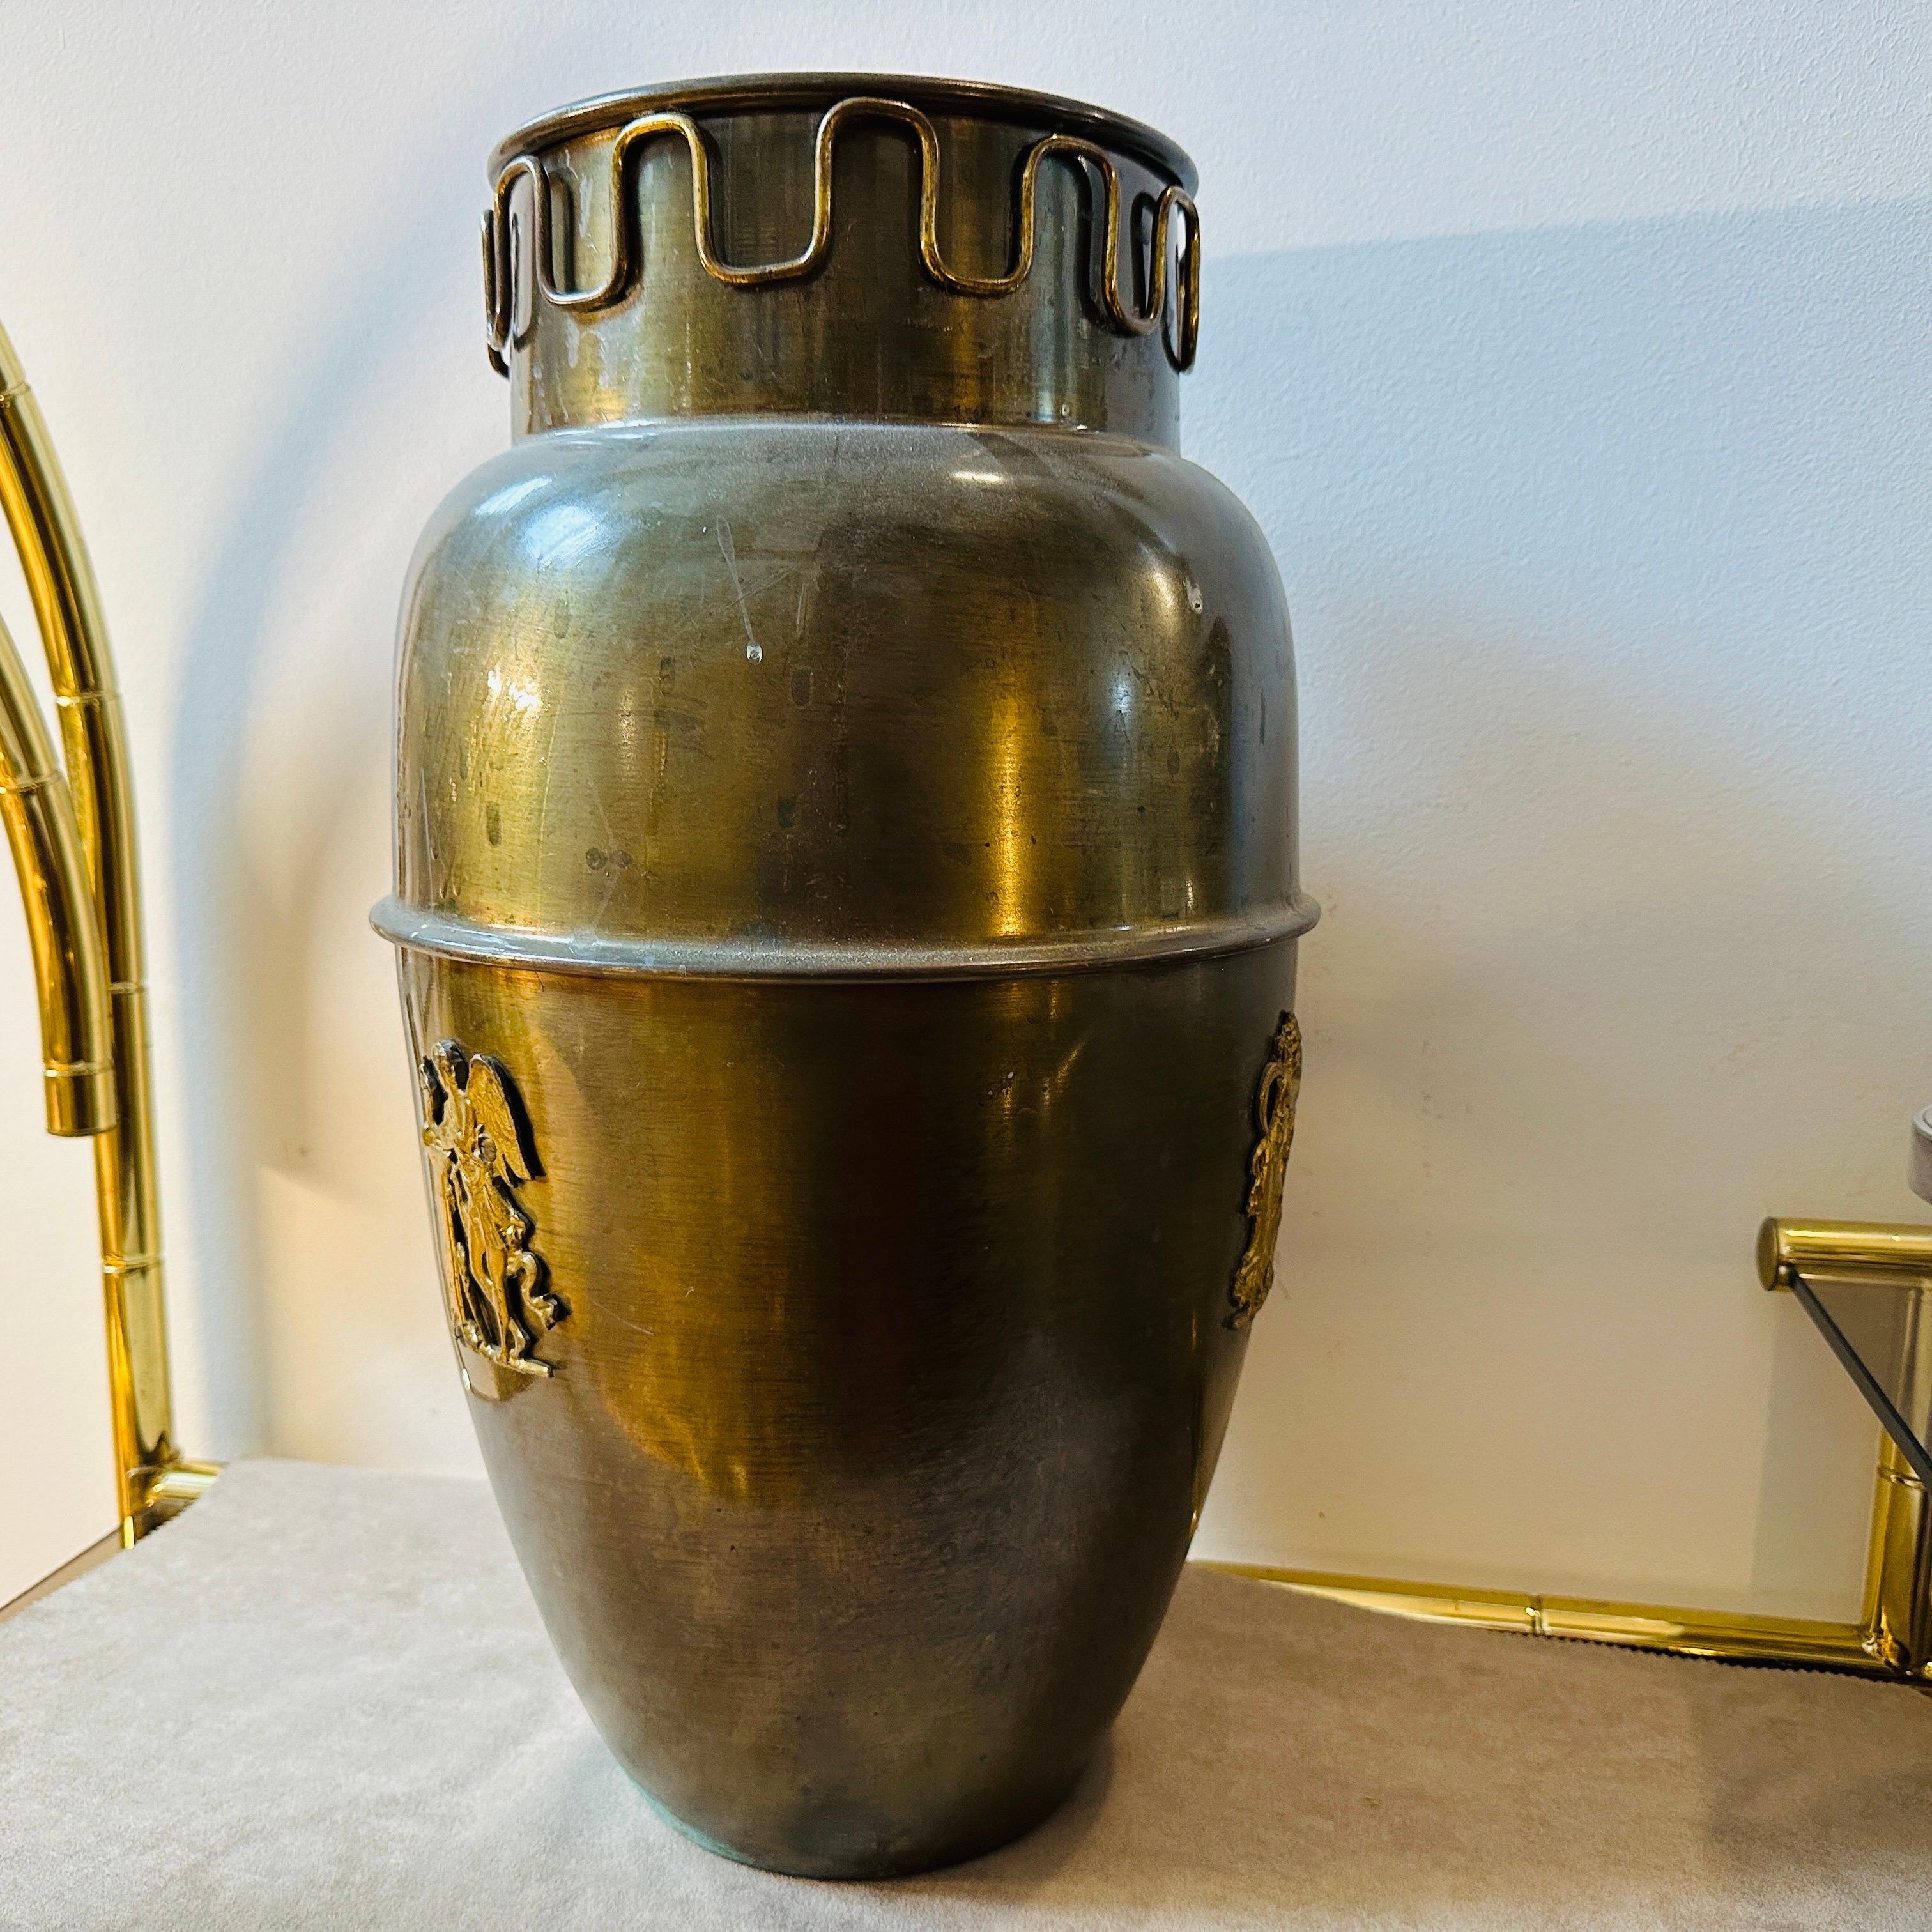 This brass umbrella stand is a stylish and collectible piece of furniture. Brass was a popular material for Mid-Century Modern designs, and it imparts a sleek and timeless look, the original patina and the original condition of the brass gives it a